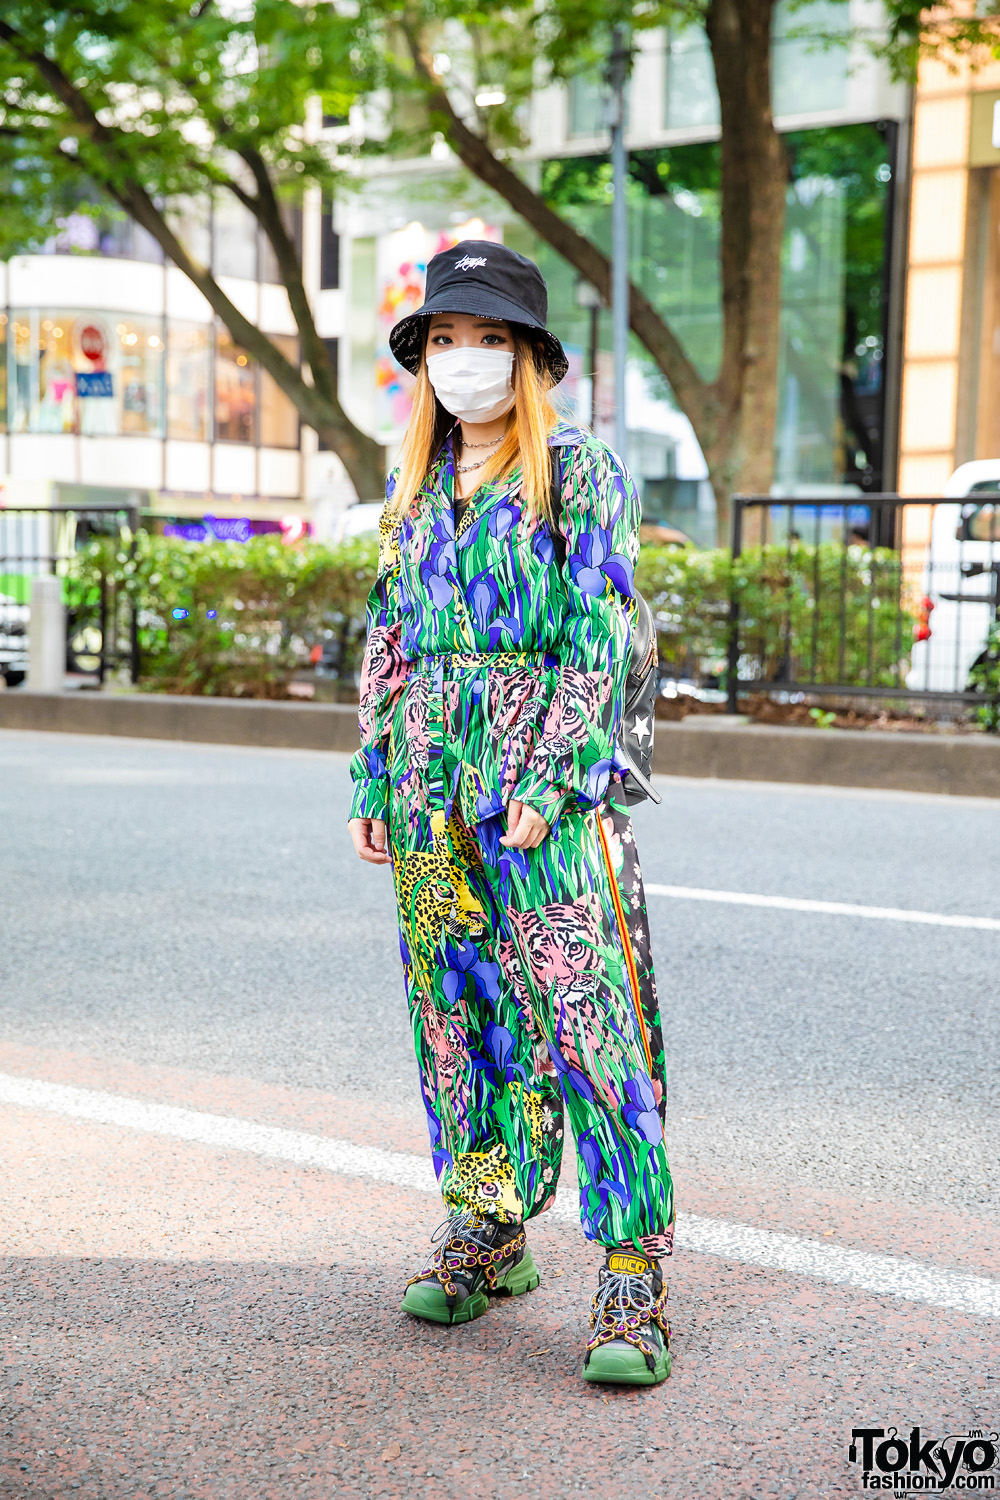 Tokyo Gucci Streetwear Style w/ Thuglife Reversible Bucket Hat, Barbed Wire Necklace, Feline Garden Print Suit, Moschino Backpack & Gucci Flashtrek Jewel Sneakers